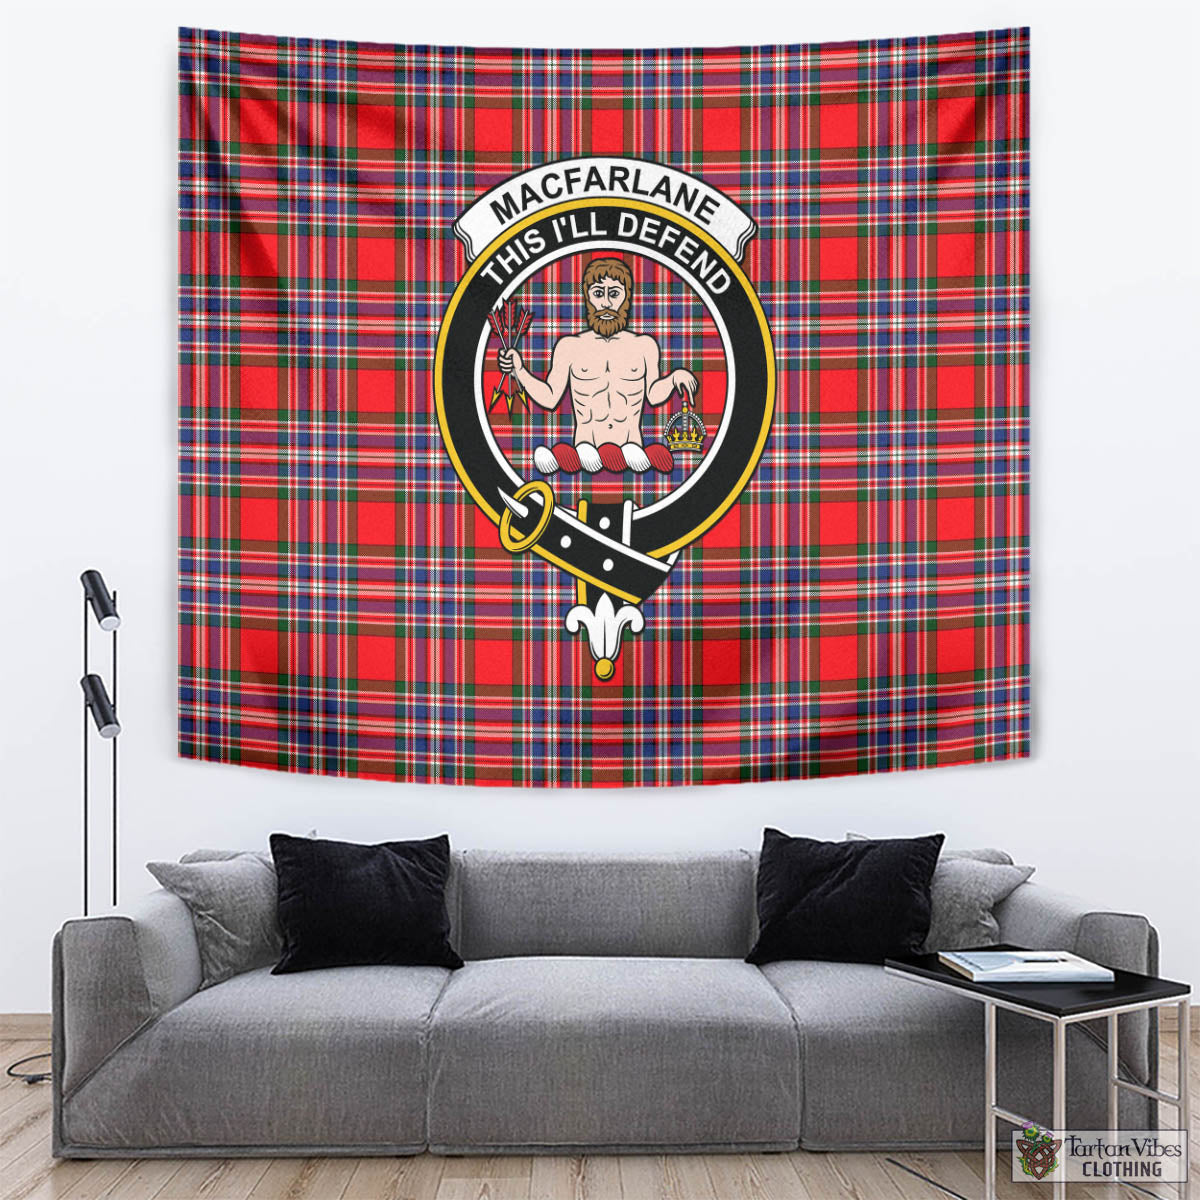 Tartan Vibes Clothing MacFarlane Modern Tartan Tapestry Wall Hanging and Home Decor for Room with Family Crest